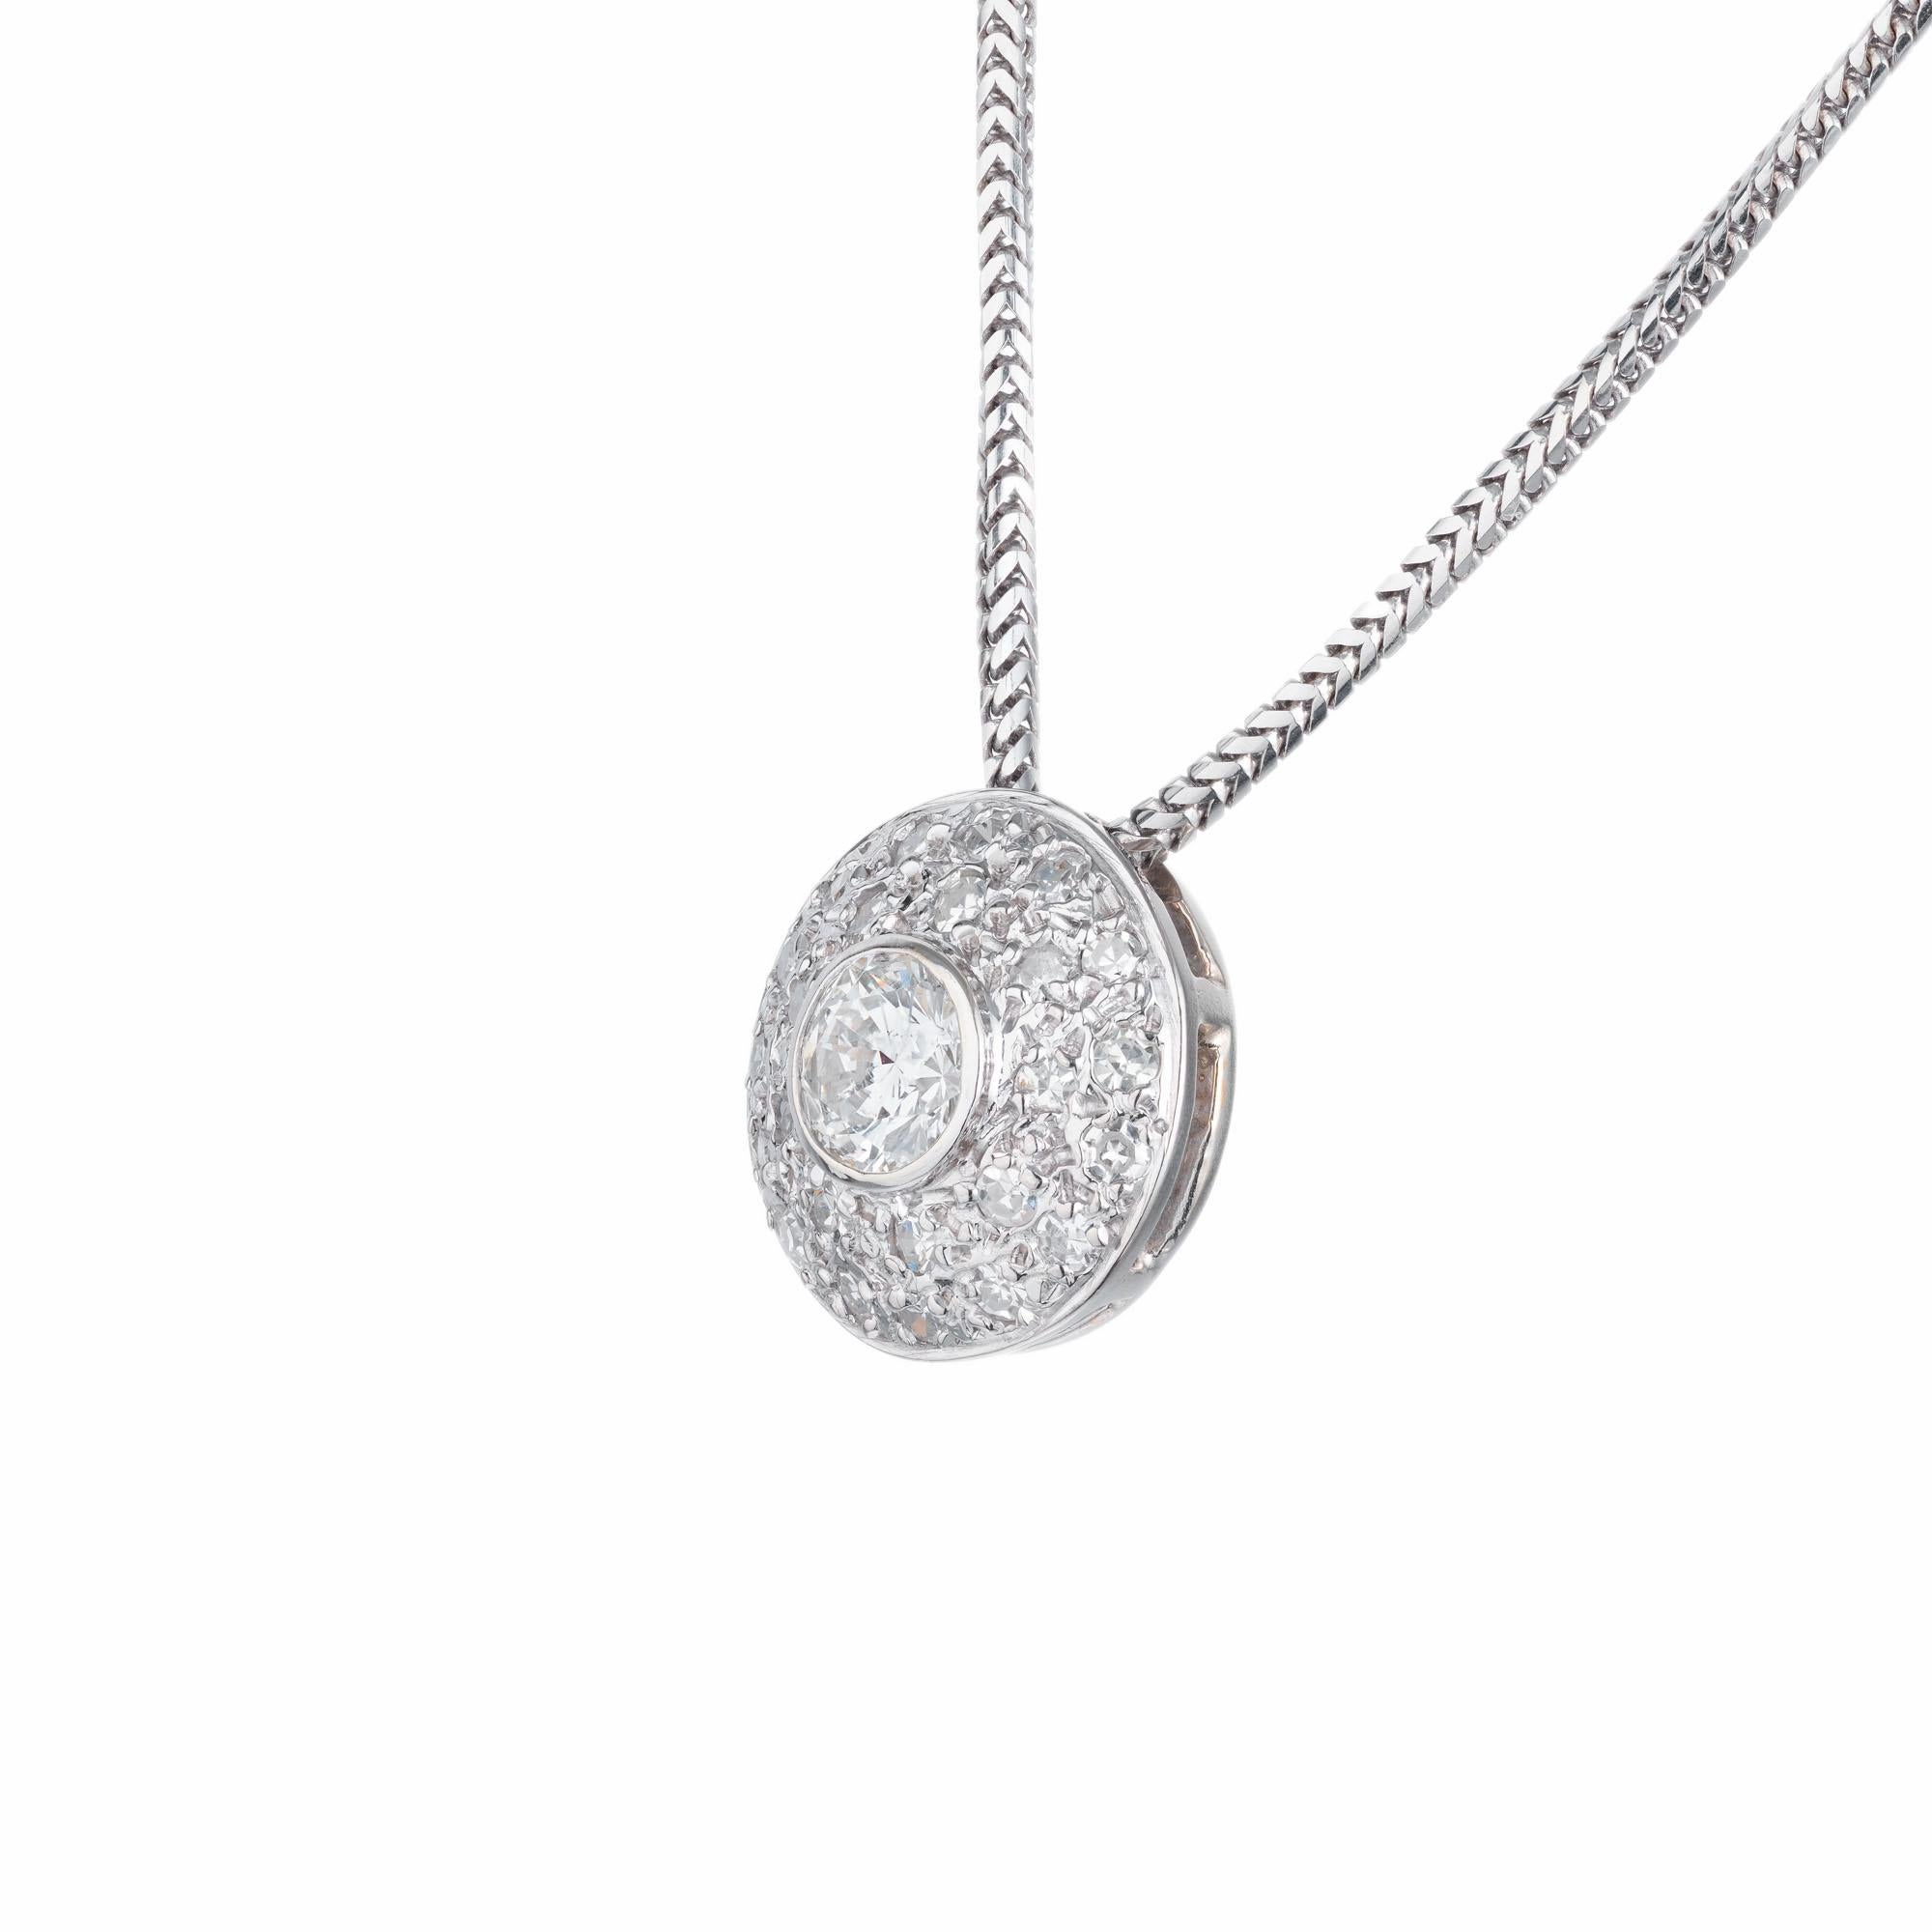 Diamond domed pendant necklace. .53ct center bezel set diamond with a halo of 25 pave set diamonds in 14k white gold. 18 inch snake style chain. 

1 round diamond approx. total weight .53ct, G, SI1.
25 round diamonds approx. total weight .46cts, G,